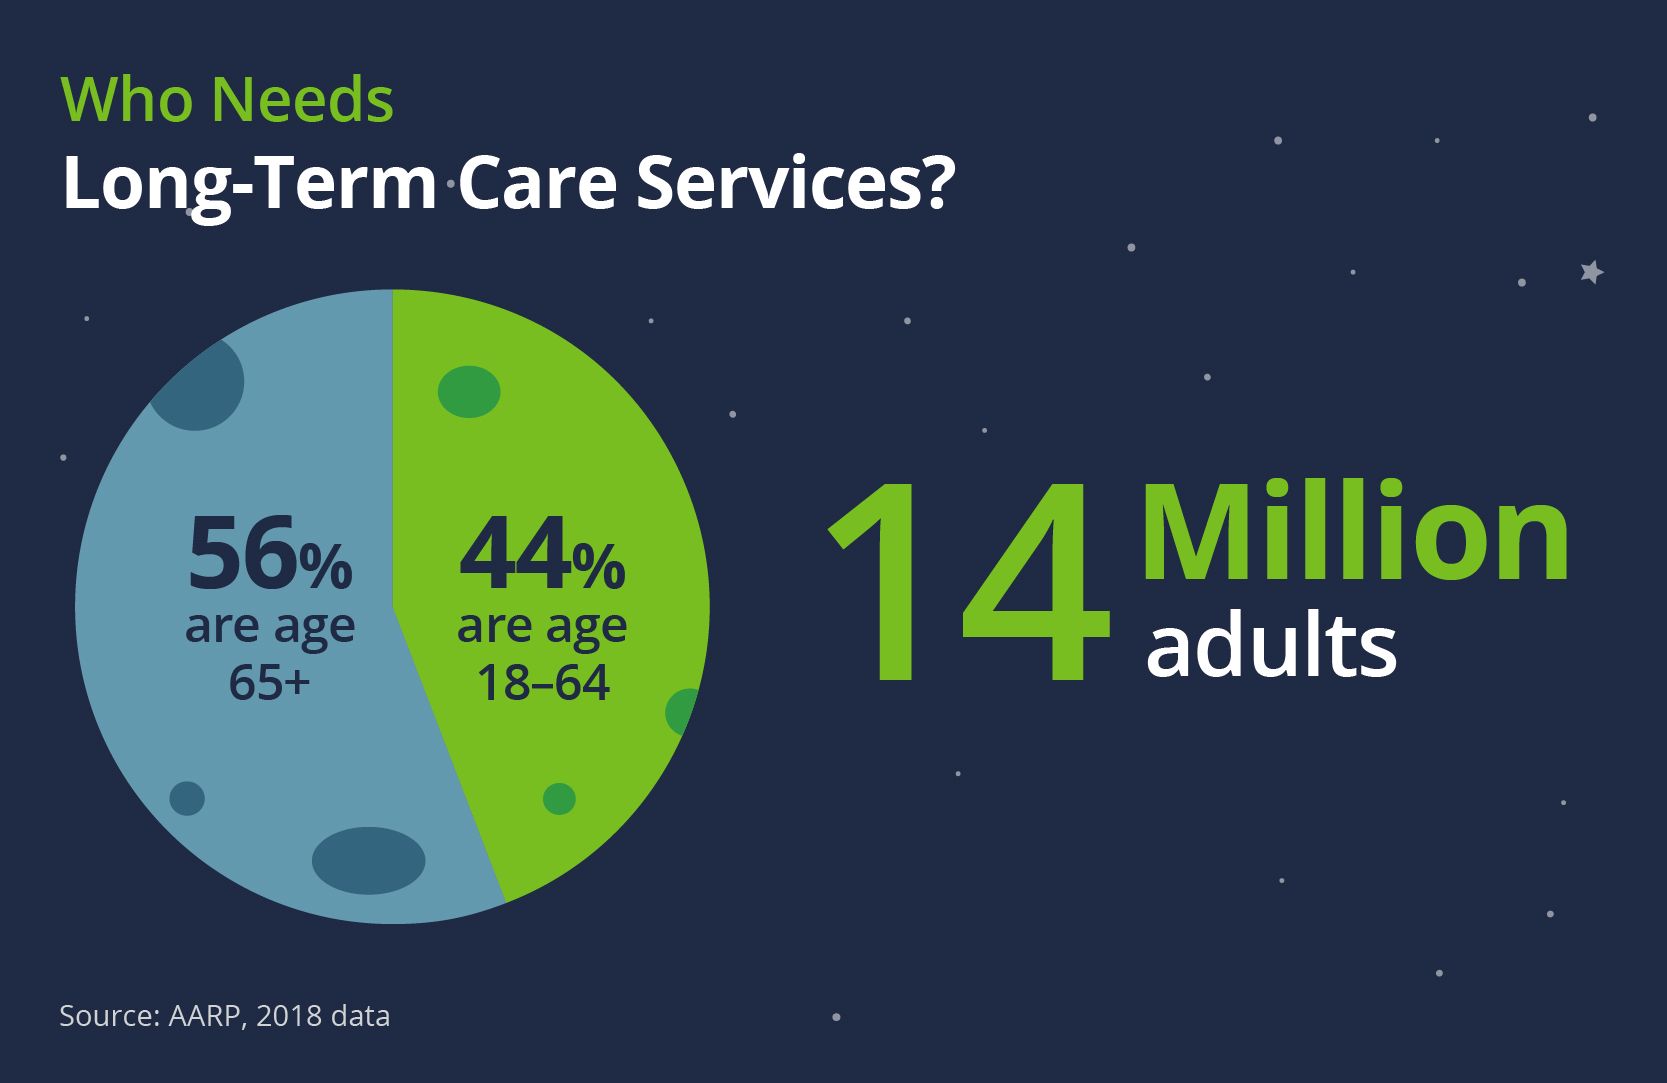 Long-Term Care Services: 44% are under age 65